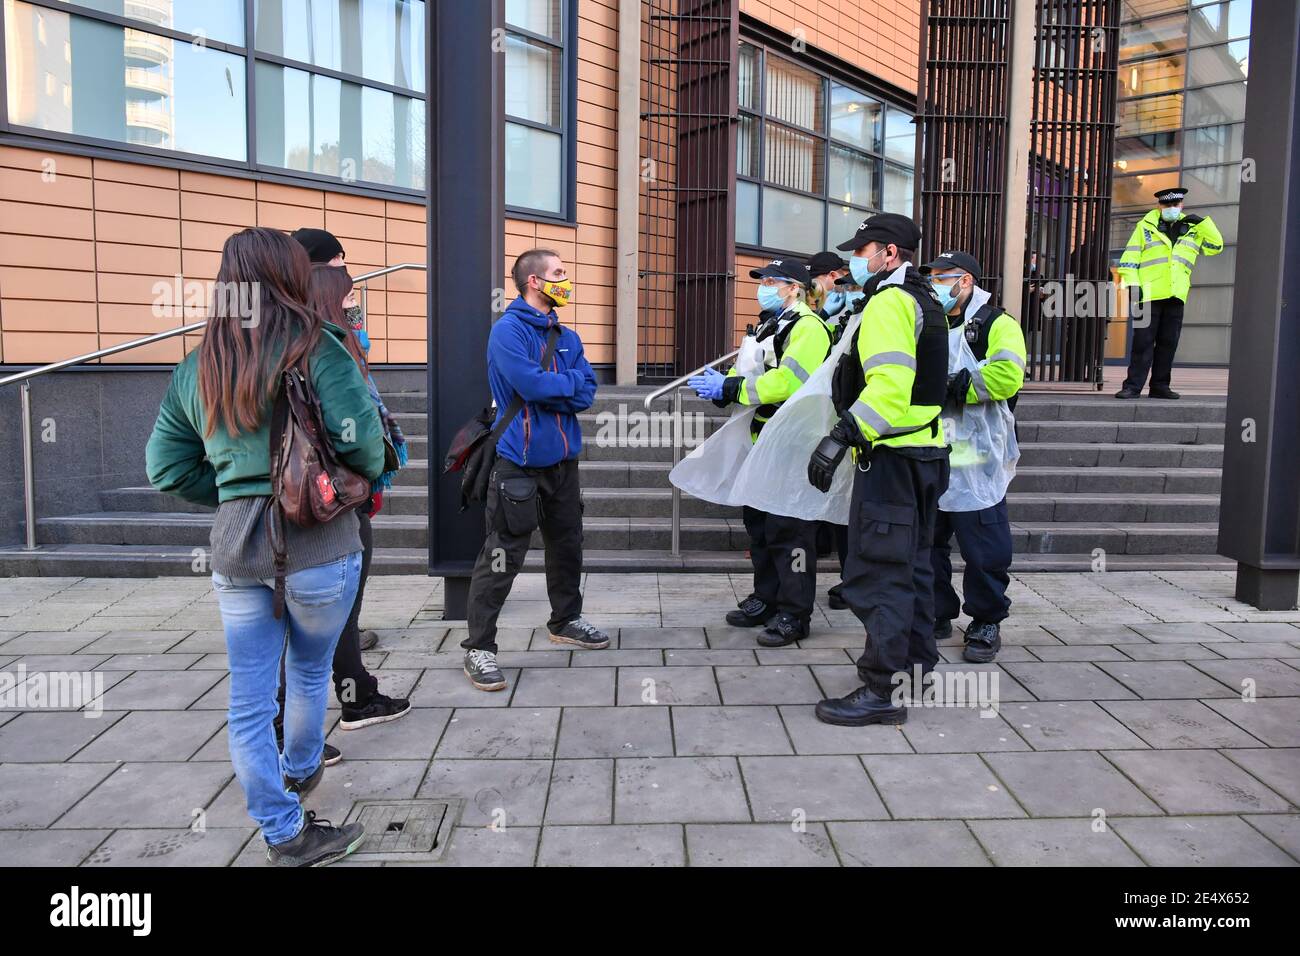 Protesters outside Bristol Magistrates' Court, where Rhian Graham, Milo Ponsford, Jake Skuse and Sage Willoughby are due to appear charged with criminal damage over the toppling of the Edward Colston statue in Bristol during the Black Lives Matter protests in June last year. Picture date: Monday January 25, 2021. Stock Photo